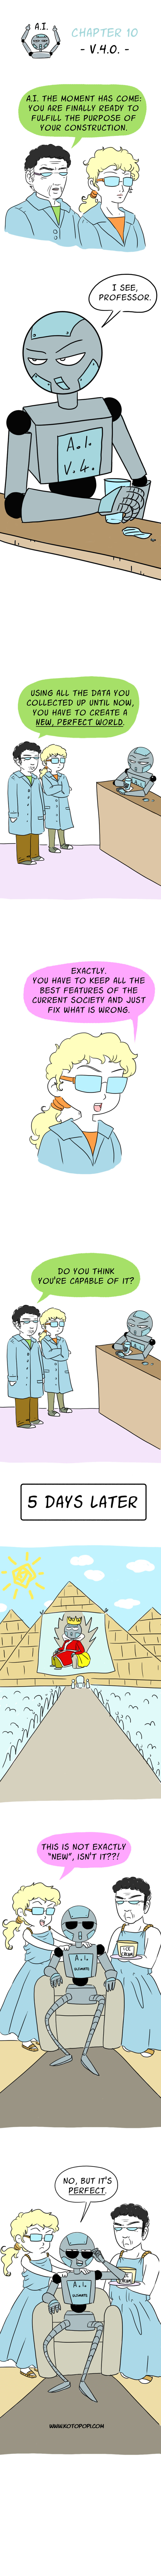 My 10 Comics About A.I. That Will Make You Laugh And Think